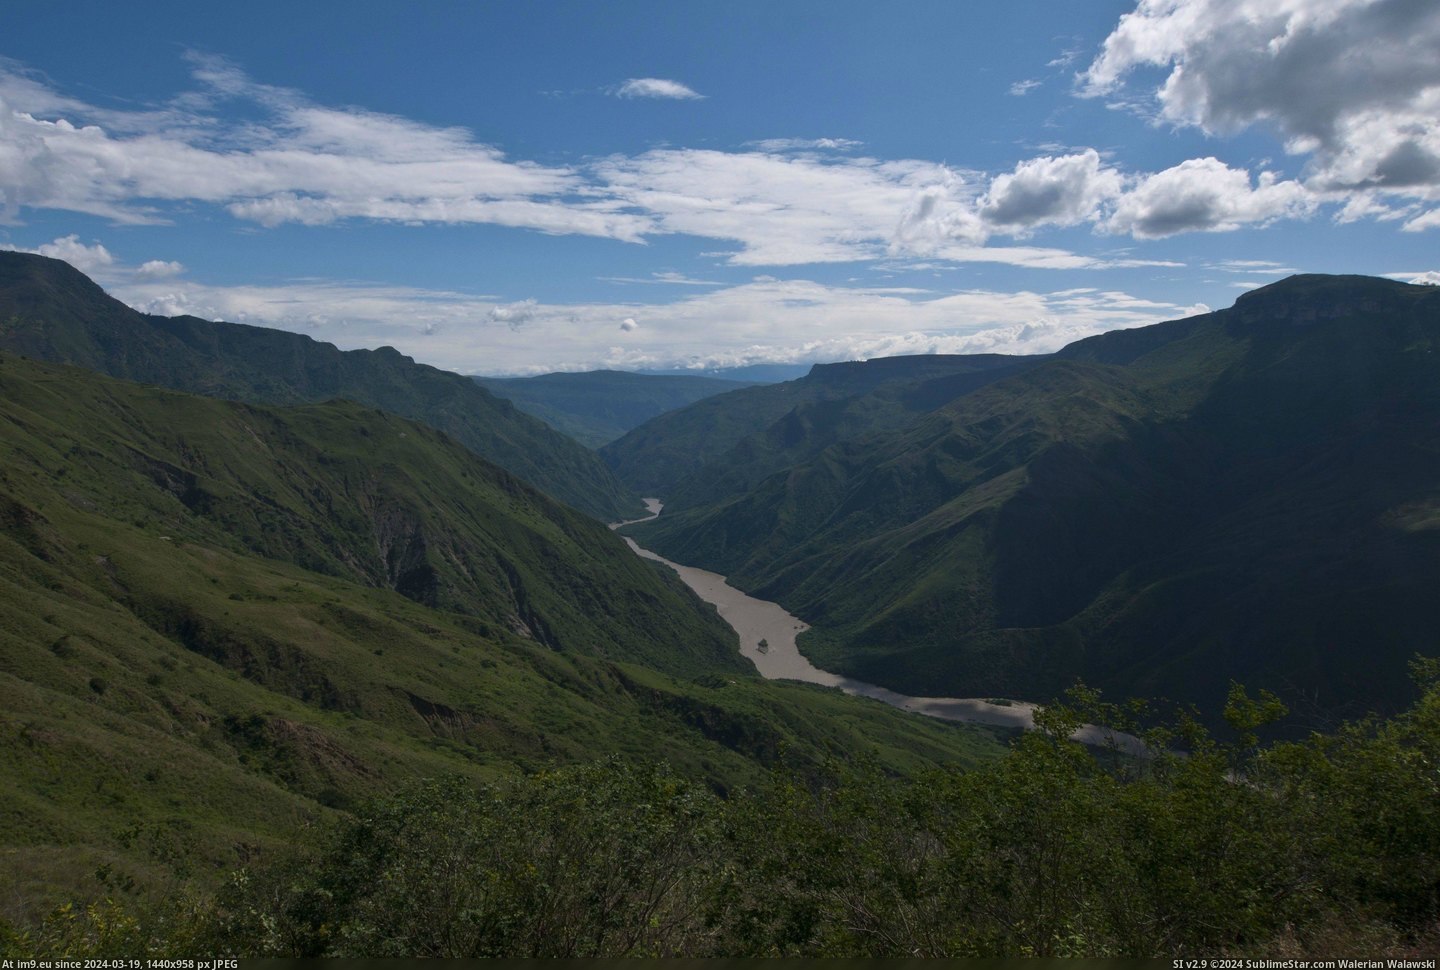 #Canyon #Colombia #Santander #4000x2672 #Chicamocha [Earthporn] Chicamocha Canyon - Santander, Colombia [4000x2672] Pic. (Image of album My r/EARTHPORN favs))